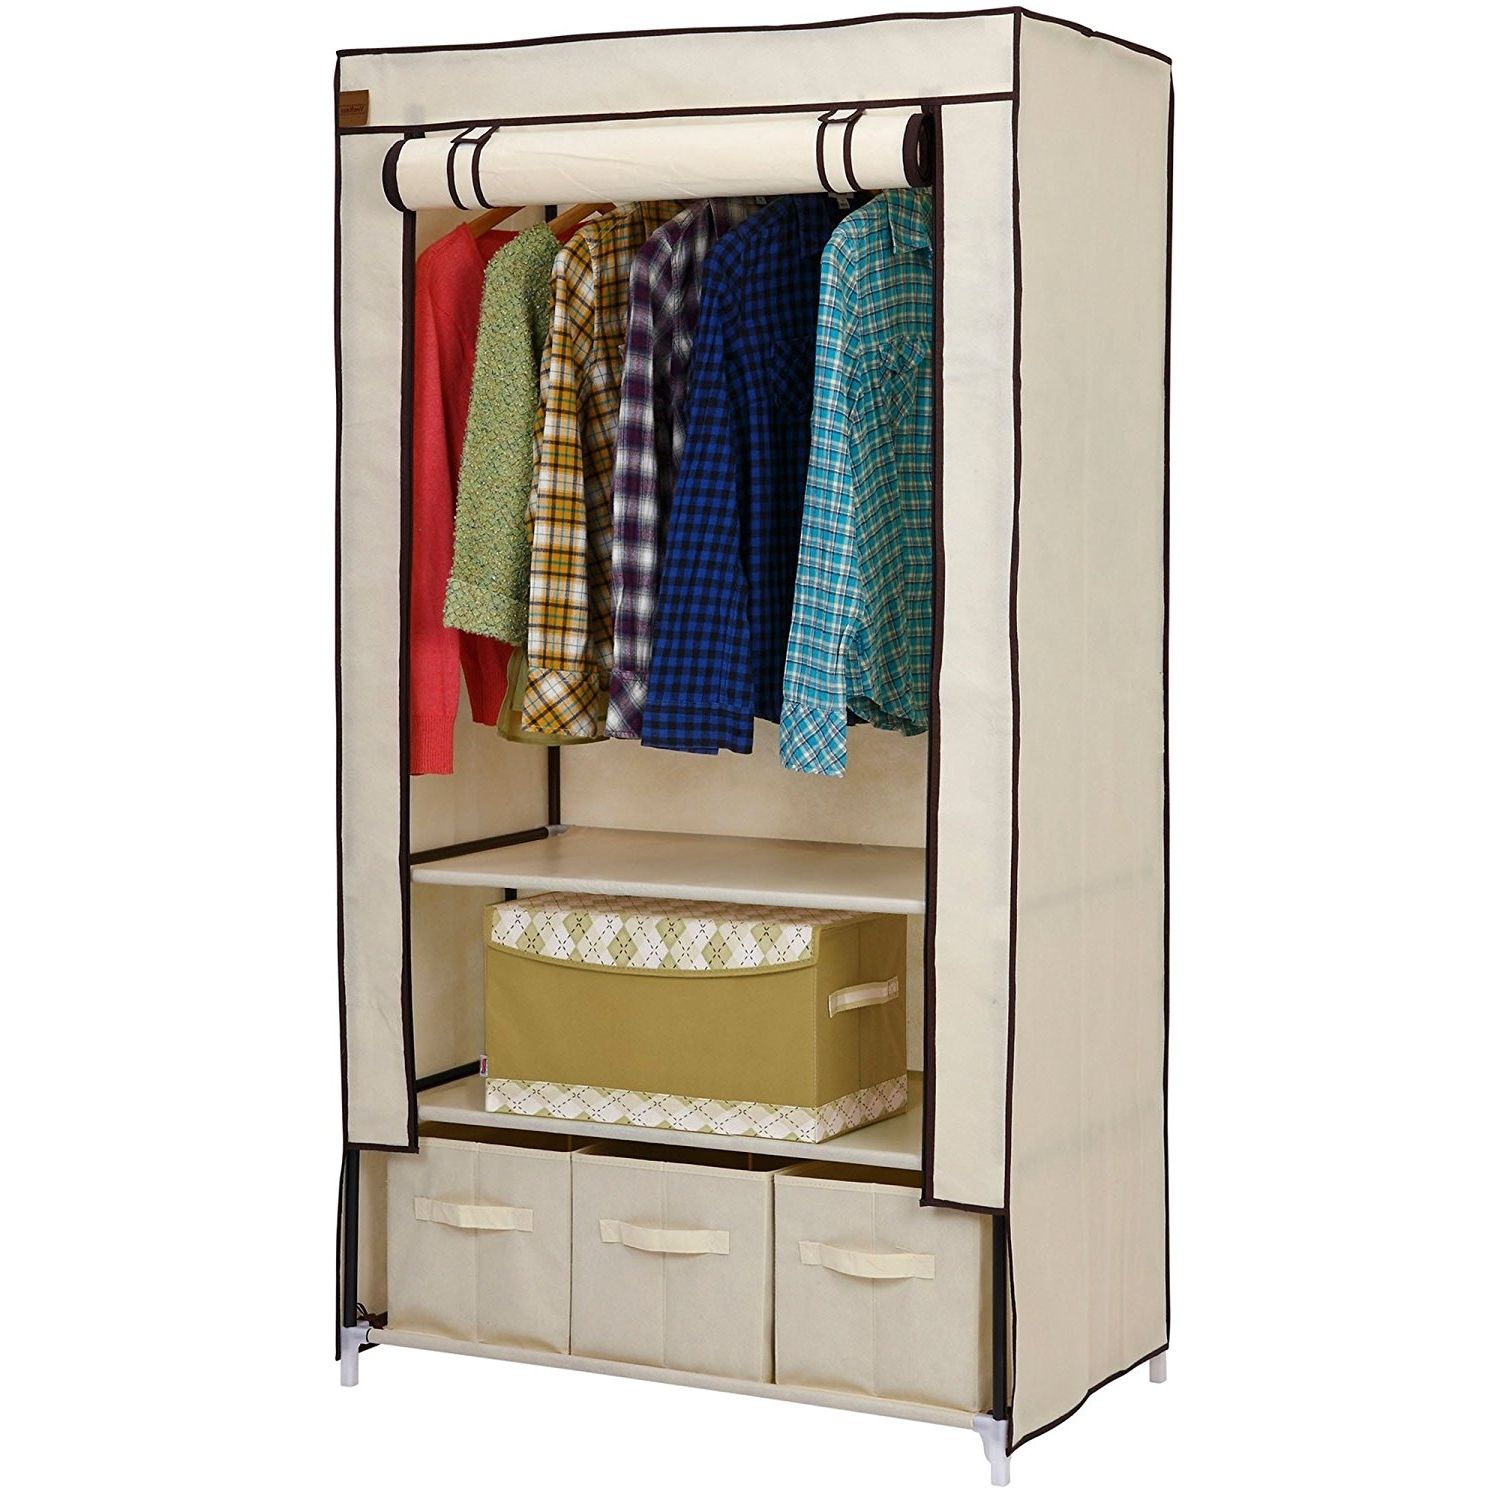 Double Clothes Rail Wardrobes With Most Current Vonhaus Double Canvas Effect Wardrobe – Clothes Storage Cupboard (View 7 of 15)